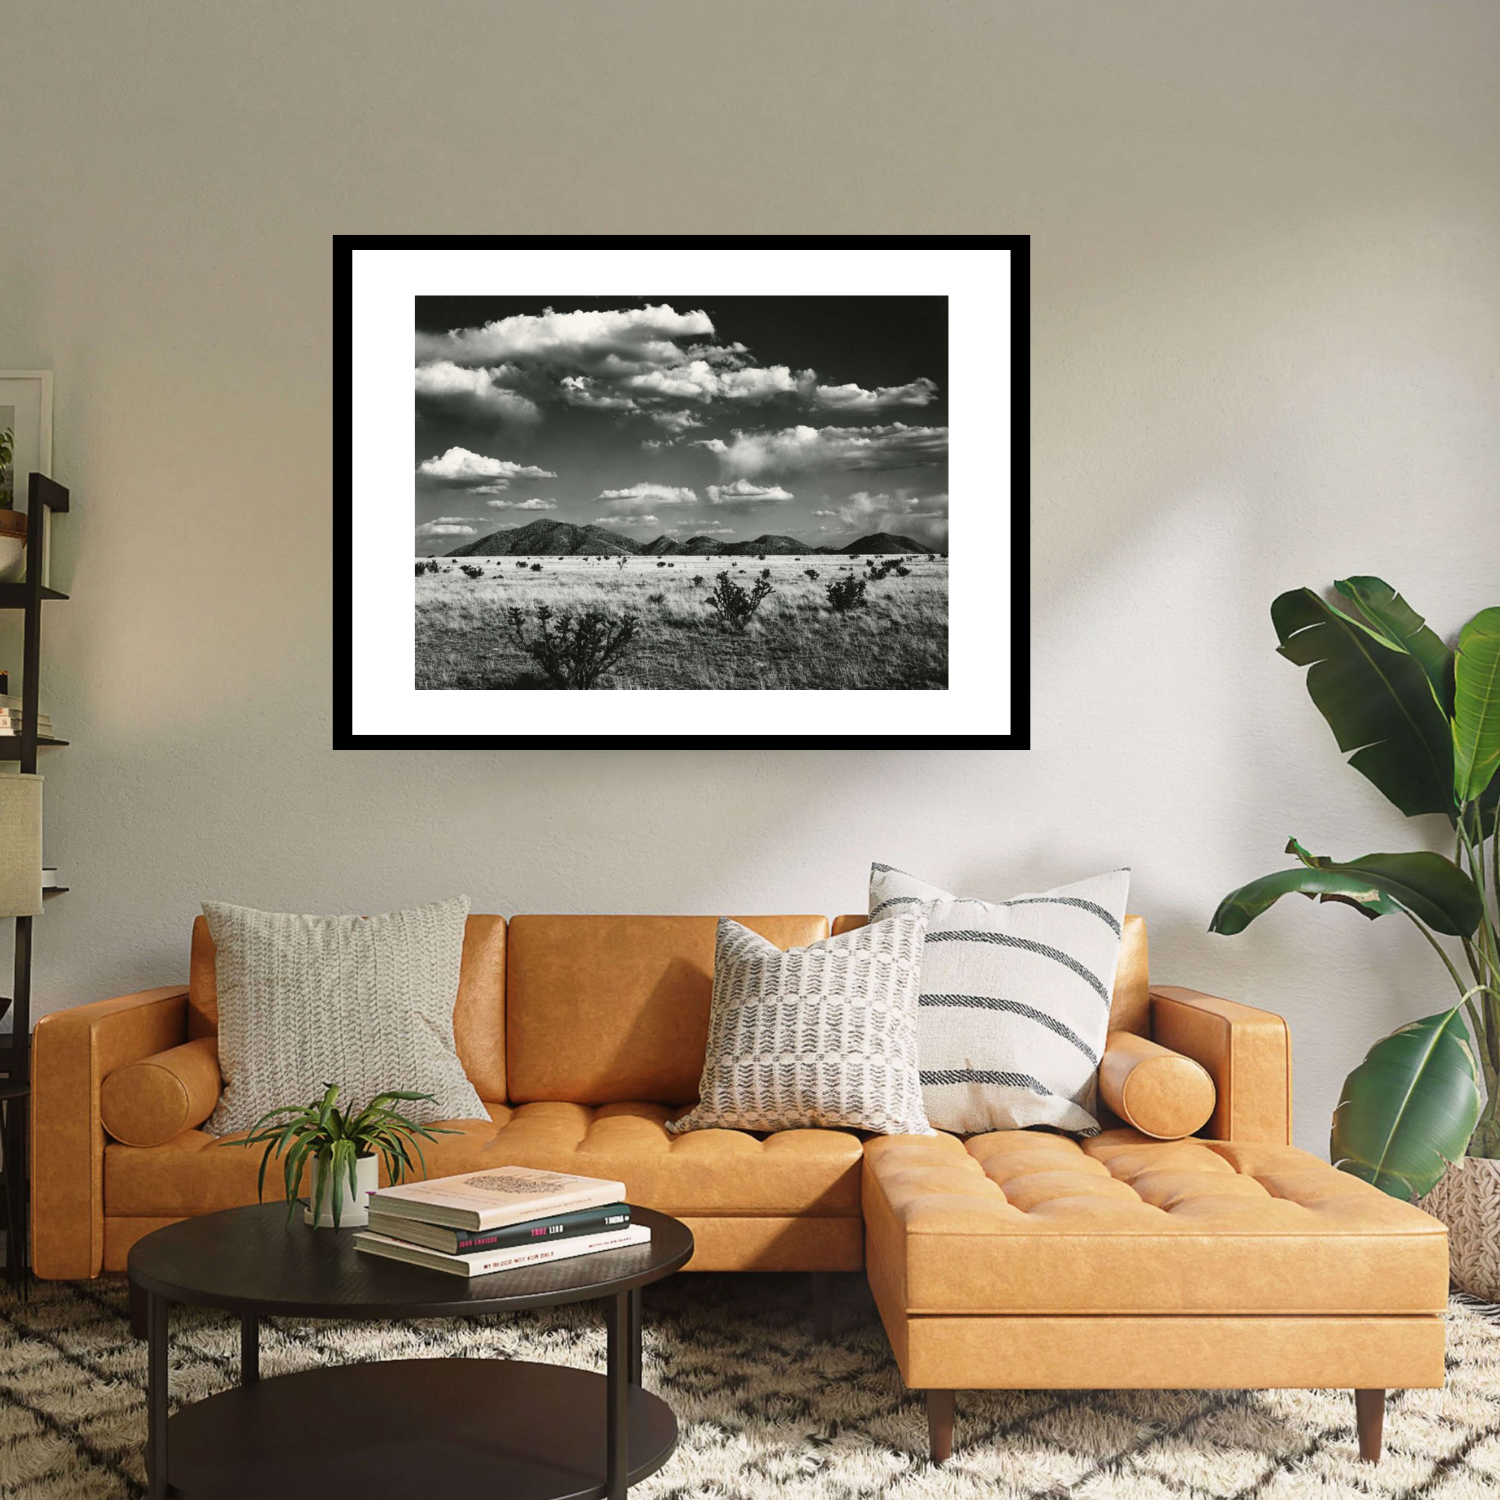 Immerse yourself in the breathtaking beauty of ‘Desert Landscape New Mexico’ by Brett Weston  This captivating black framed print encapsulates the rugged beauty of a desert vista, with majestic mountains and a dynamic cloudy sky.